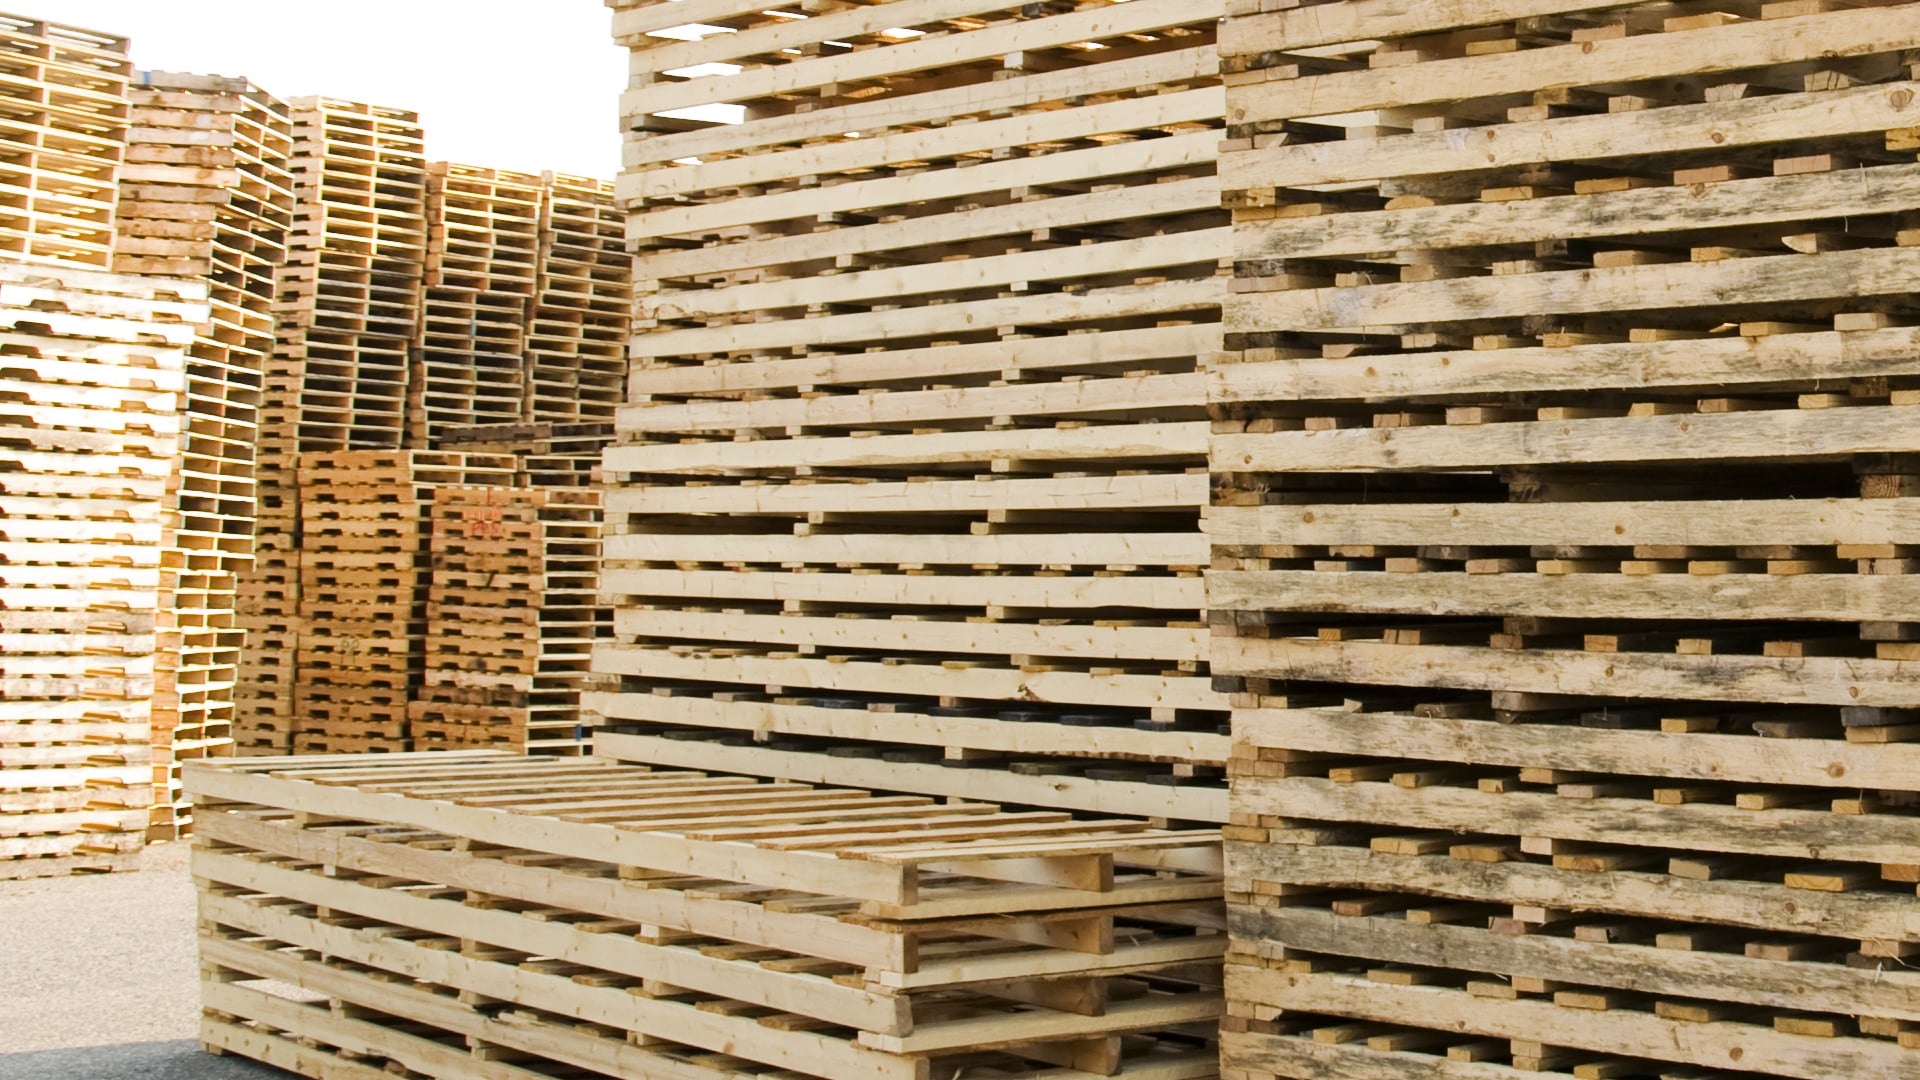 Wood Pallets For Sale from Kamps Pallets | Buy Wood Pallets